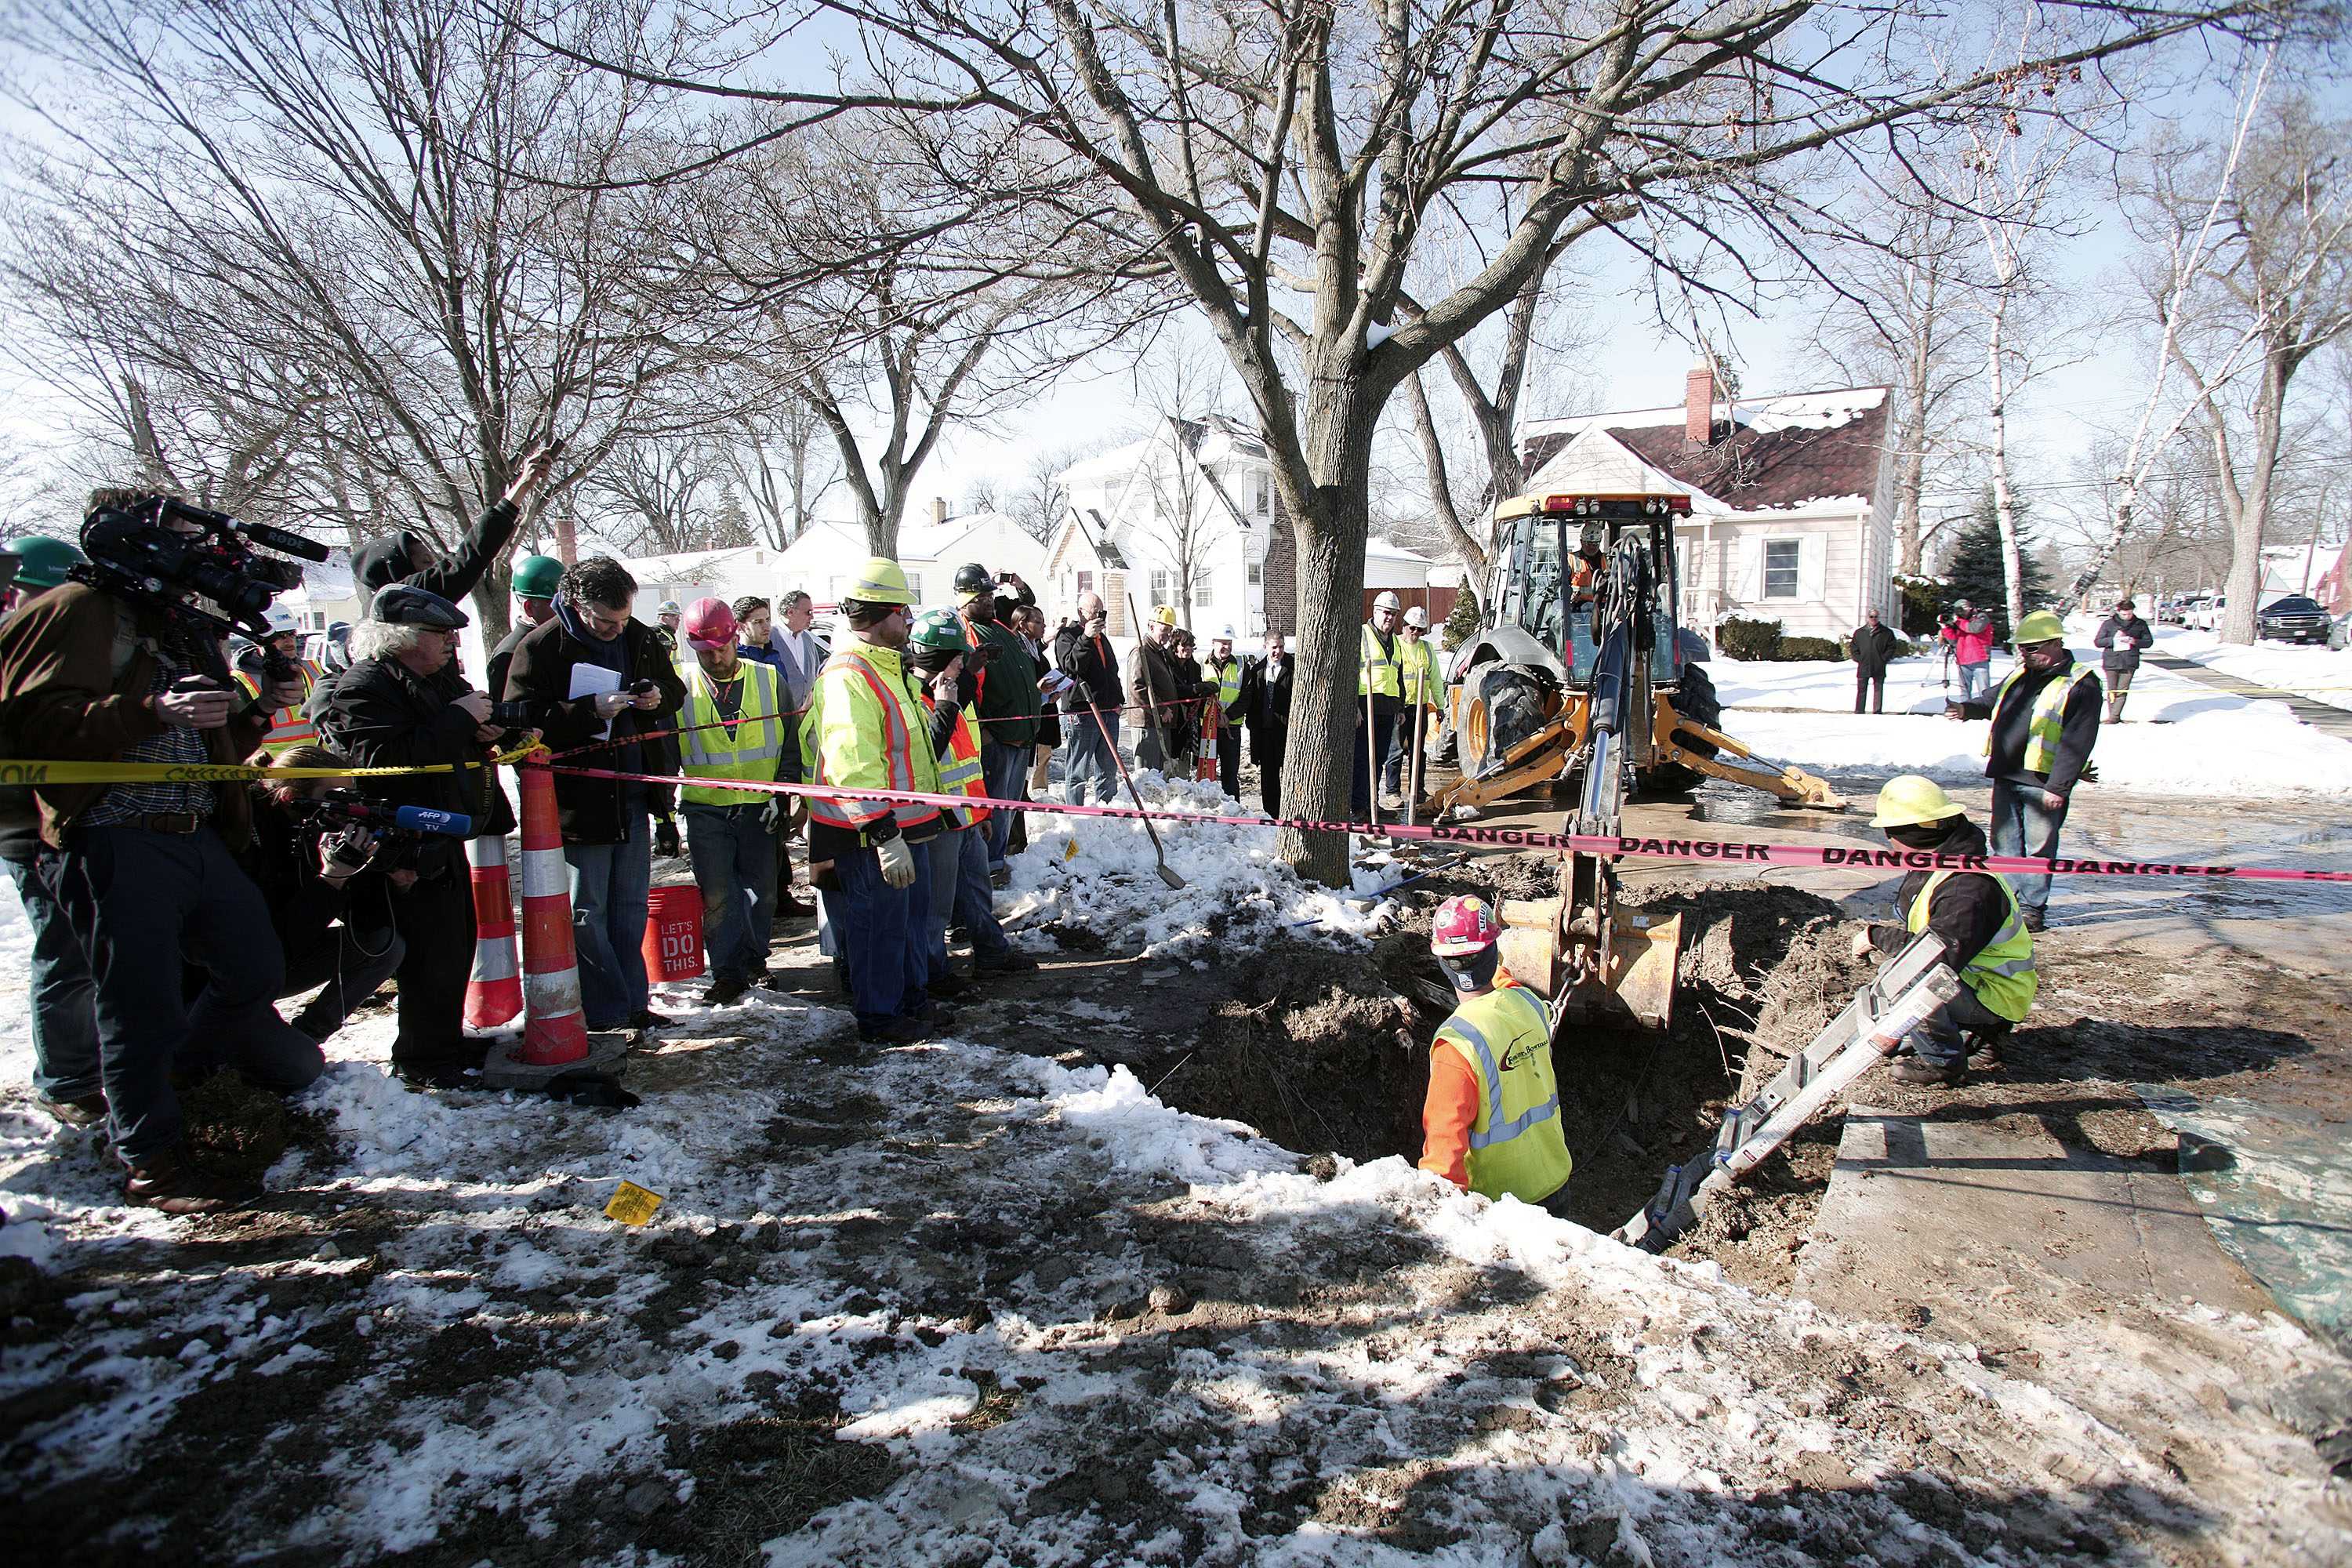 City of Flint, Michigan workers prepare to replace a lead water service line pipe at the site of the first Flint home with high lead levels to have its lead service line replaced under the Mayor's Fast Start program, on March 4, 2016 in Flint, Michigan. (Photo by Bill Pugliano/Getty Images)